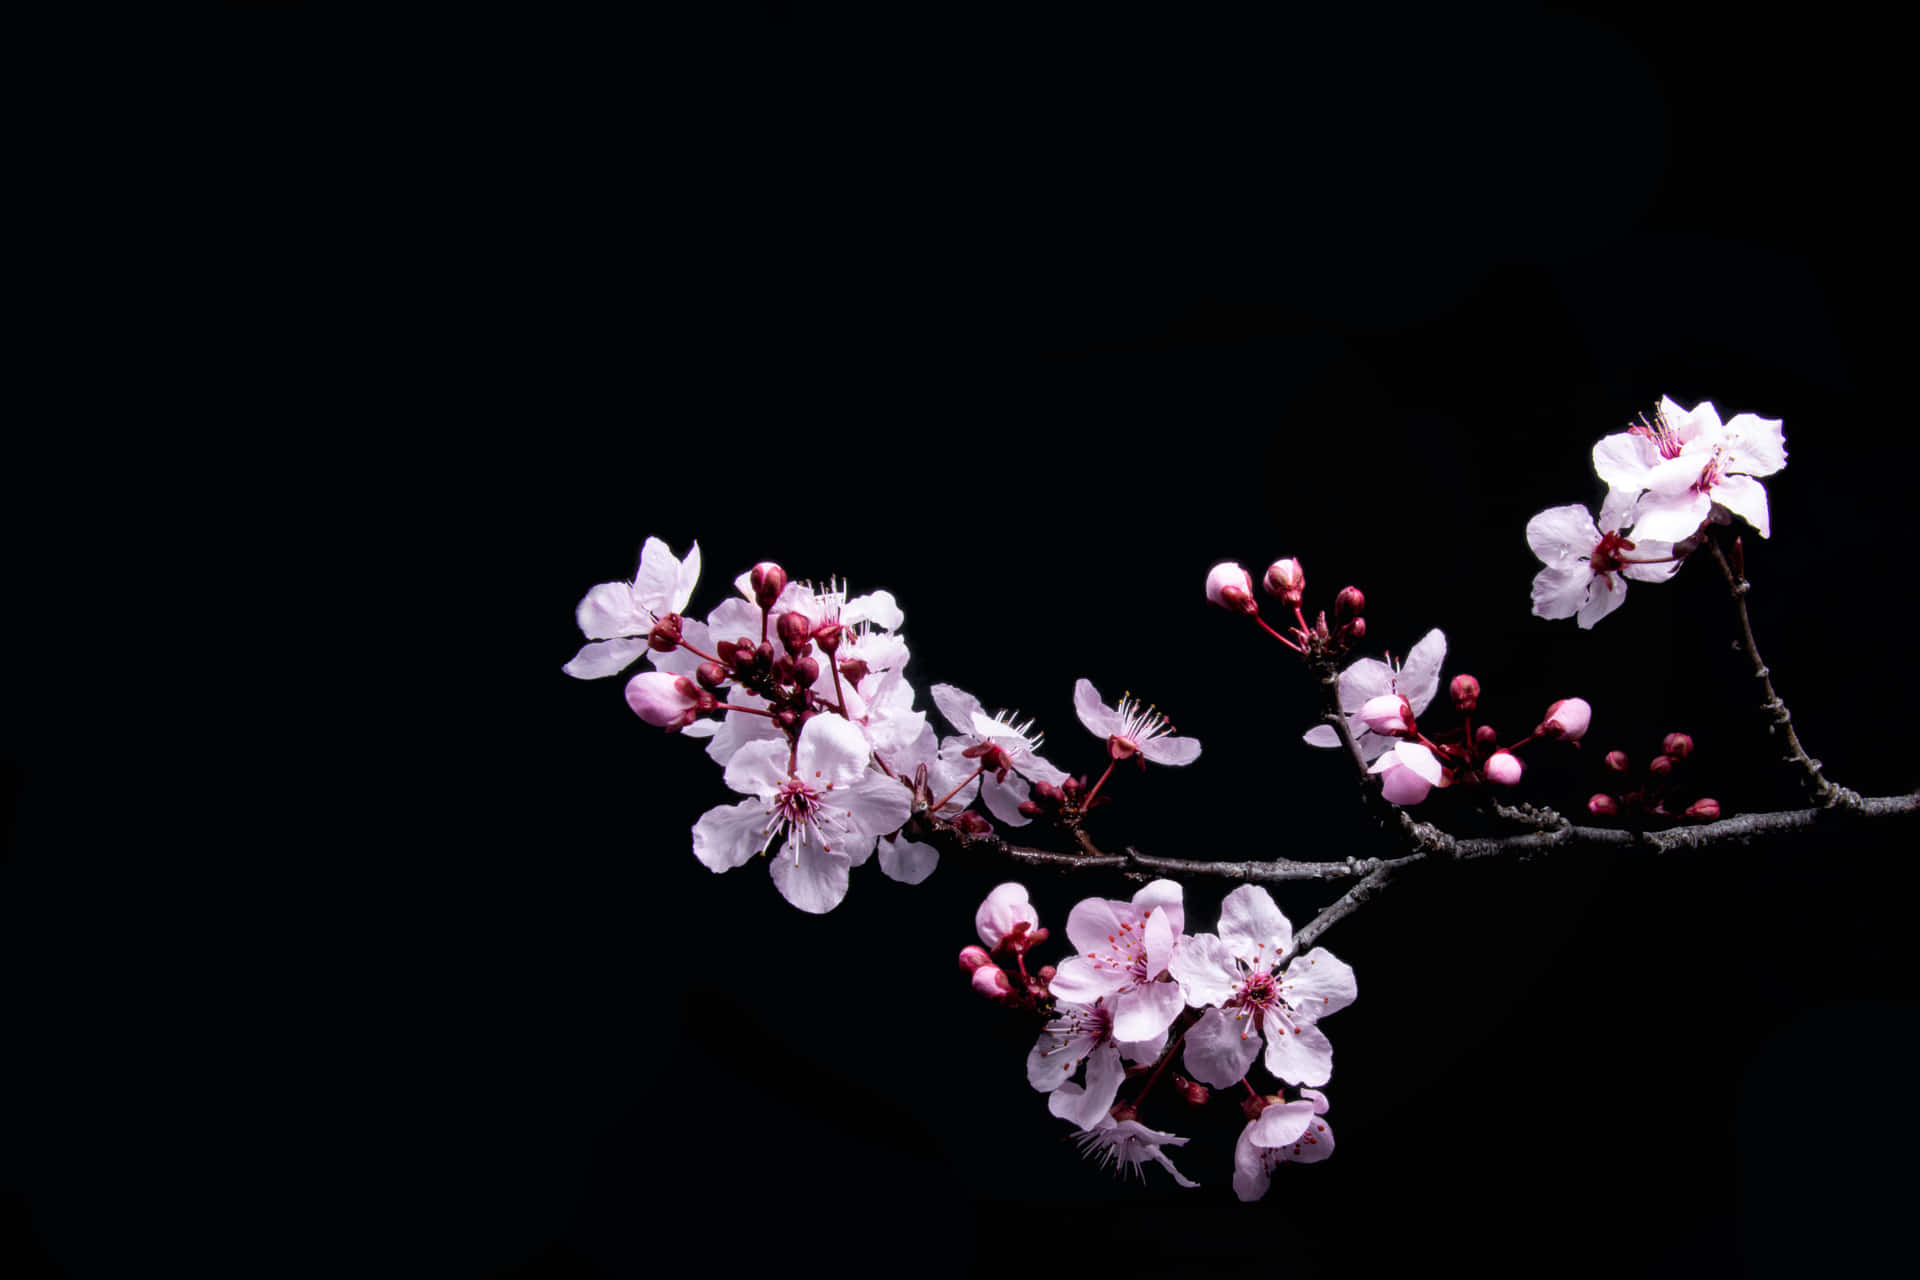 A Branch Of Cherry Blossoms Against A Black Background Wallpaper